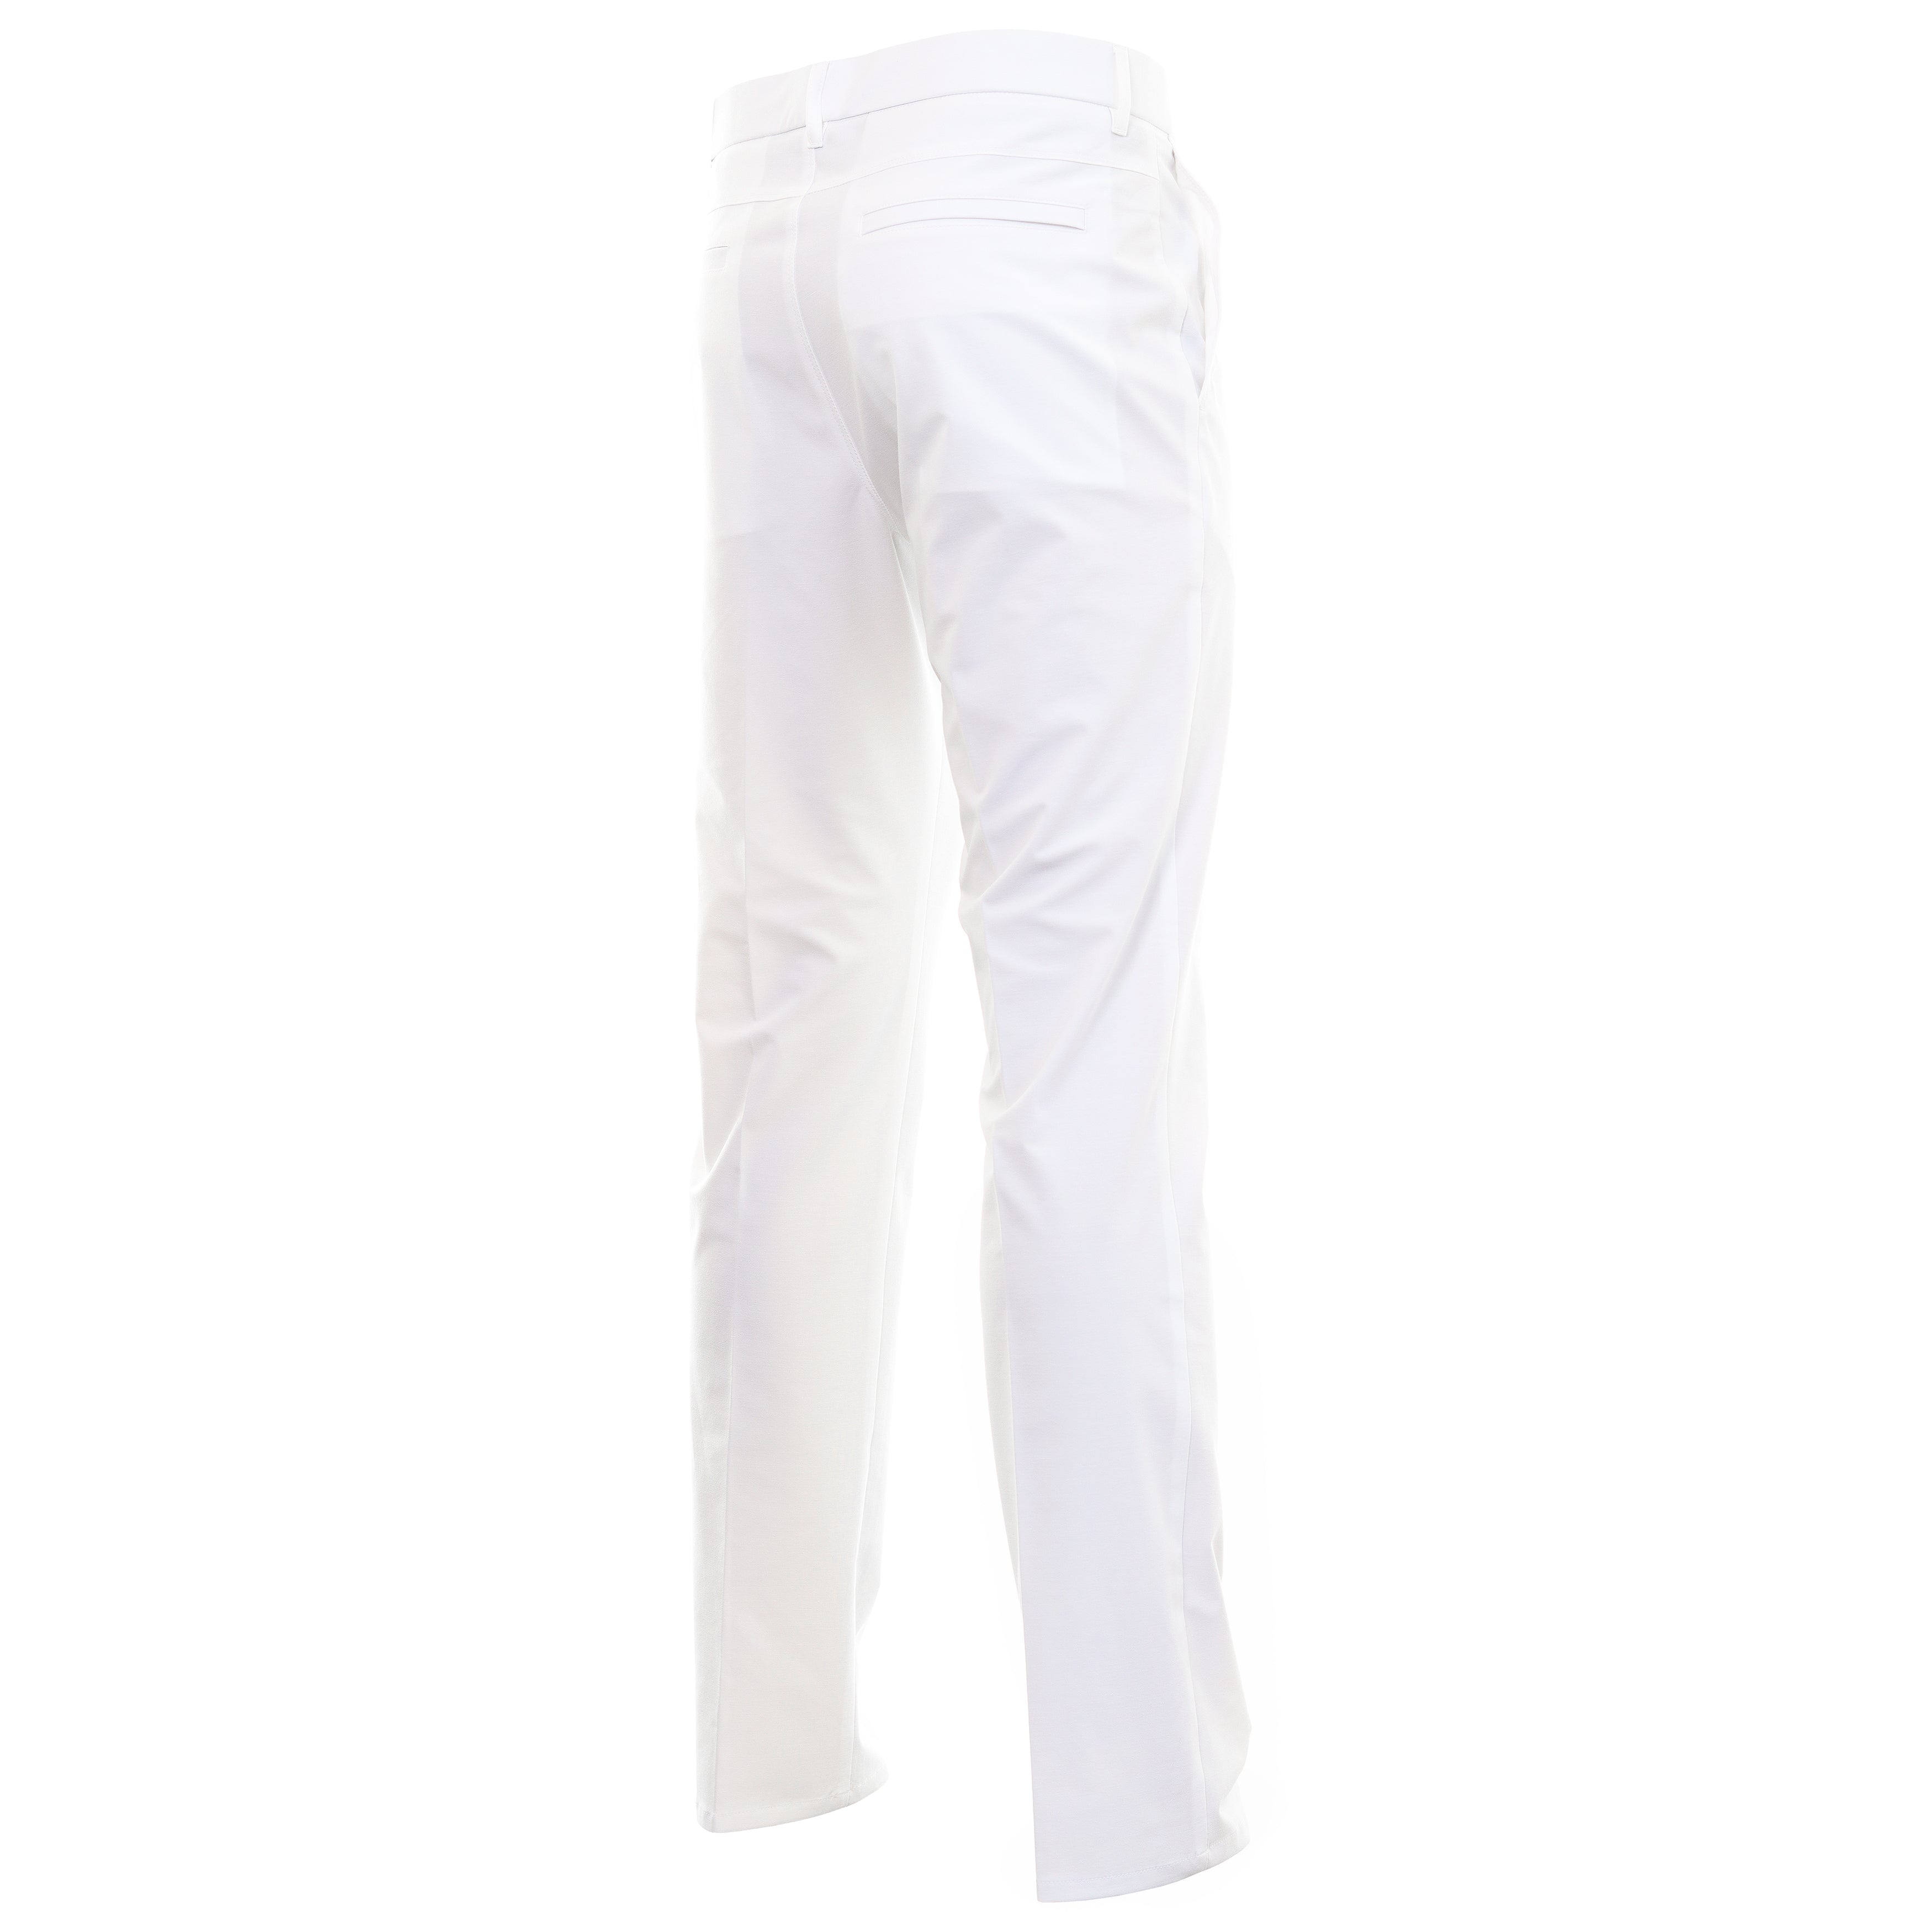 Original Penguin Golf Pete Performance Trousers OGBSC023 Bright White ...